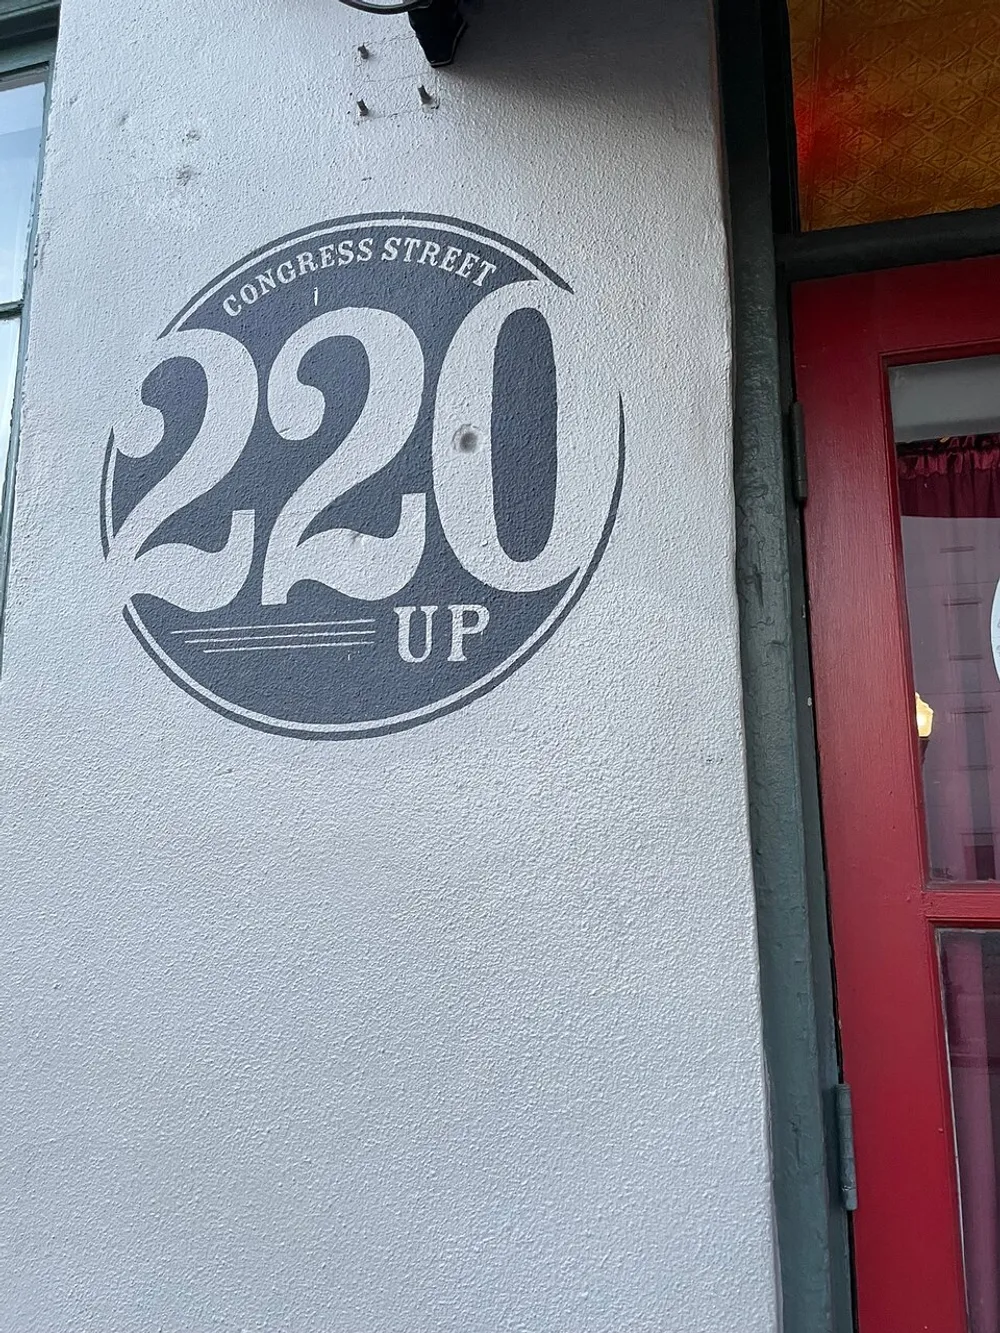 The image shows a stylized sign on a buildings exterior wall featuring the address 220 CONGRESS STREET UP